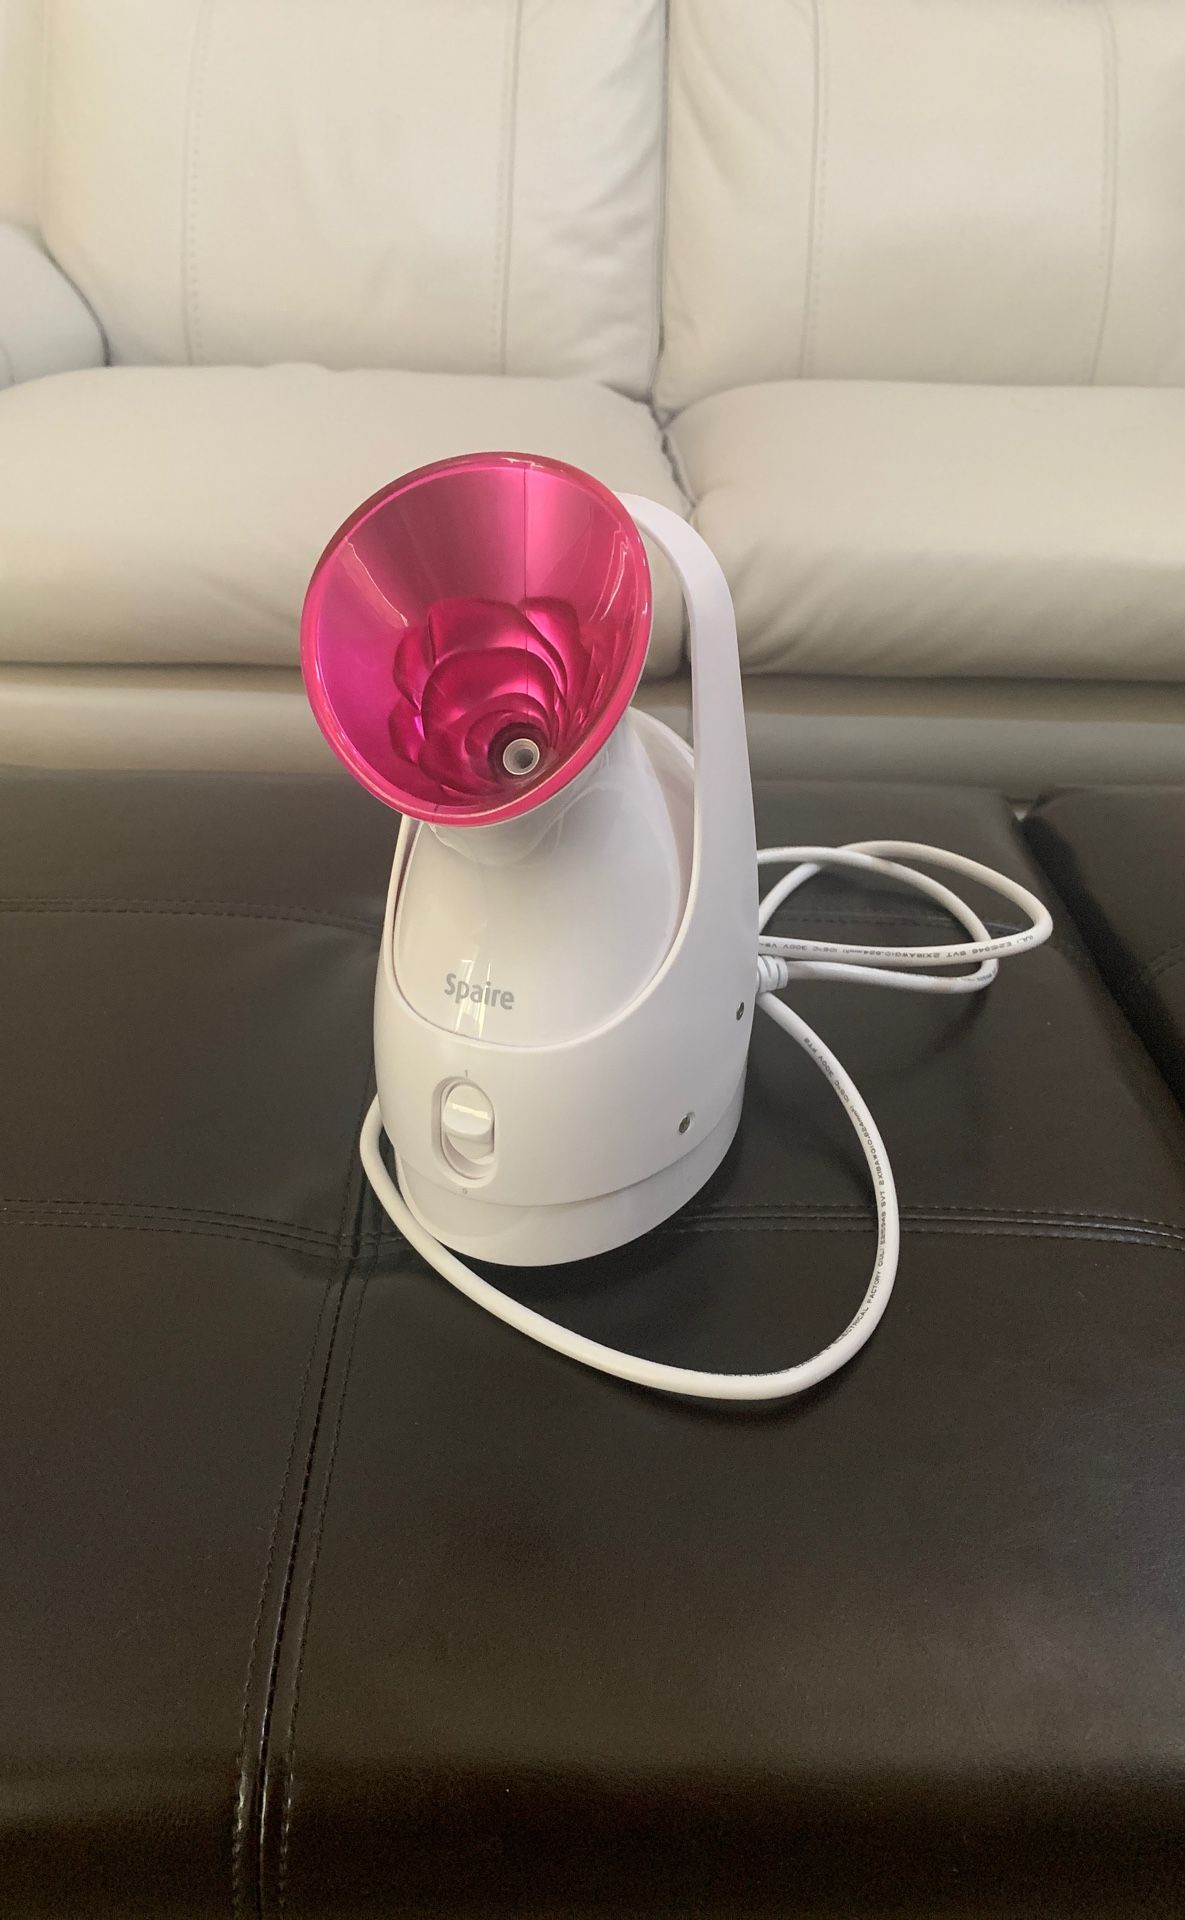 [Moving sale] Spaire Facial Steamer Ionic Atomizing Skin Care